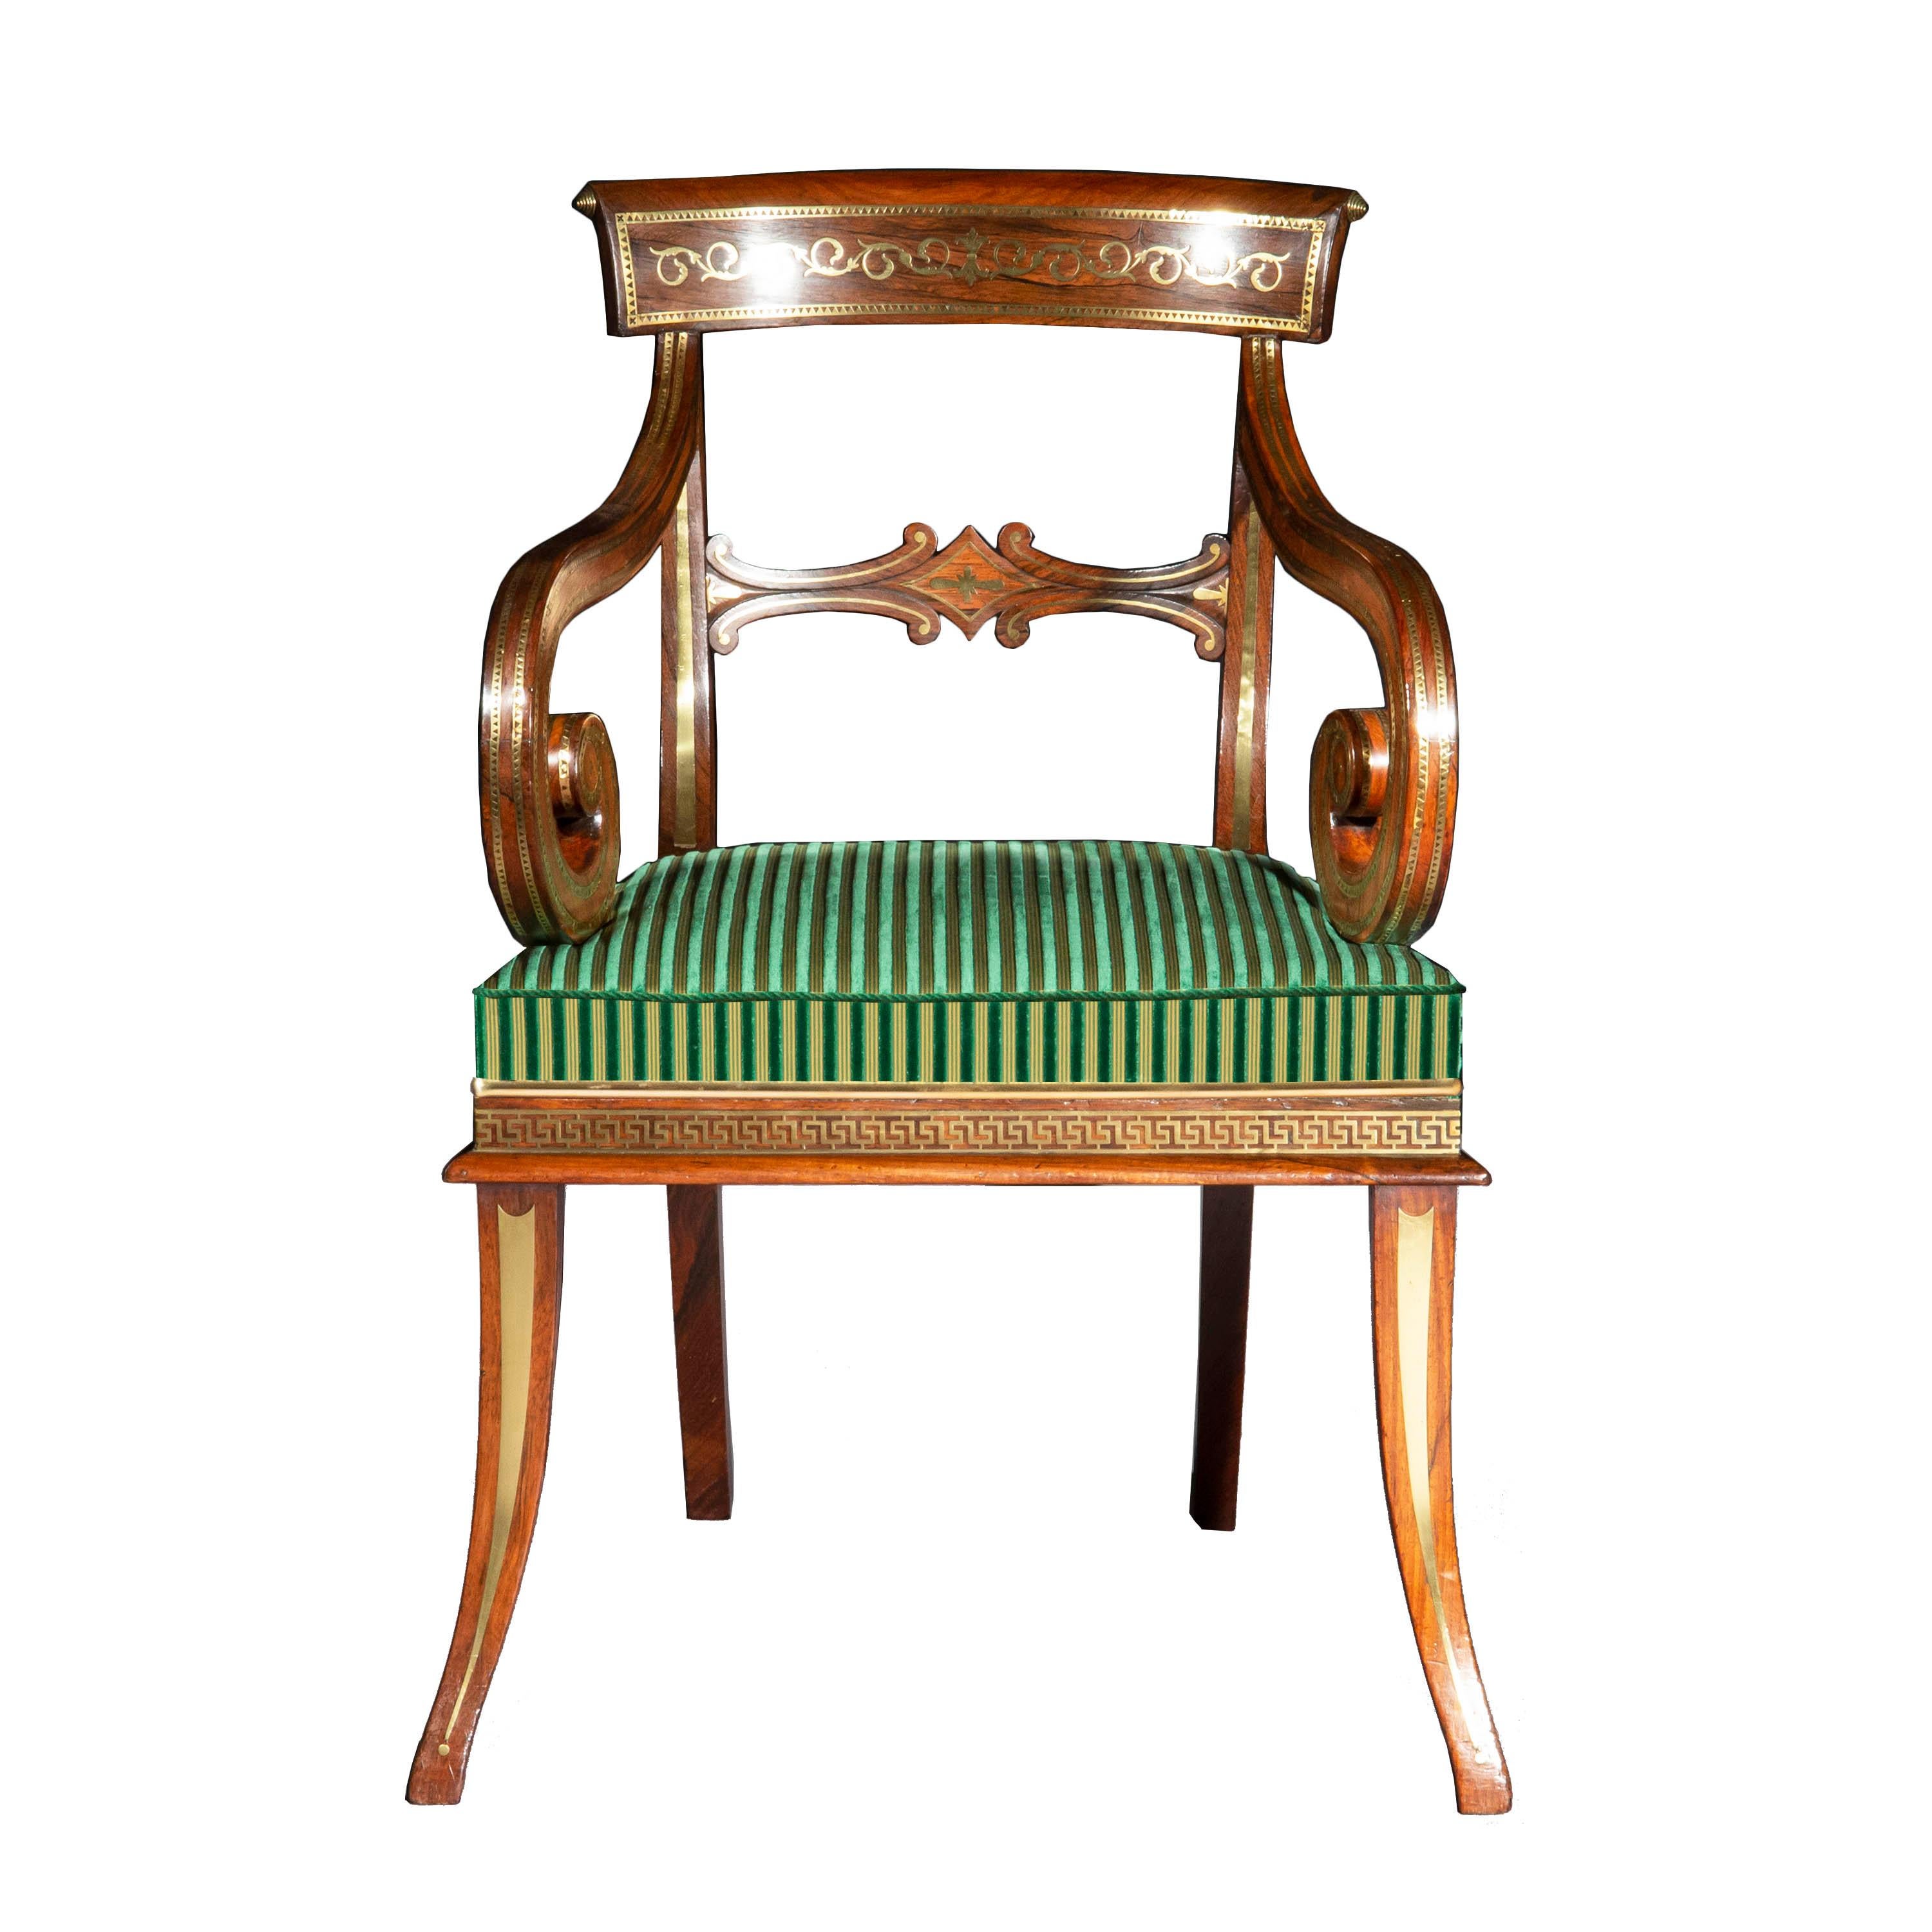 19th Century Fine Regency Brass Inlaid Armchair, Attributed to George Oakley